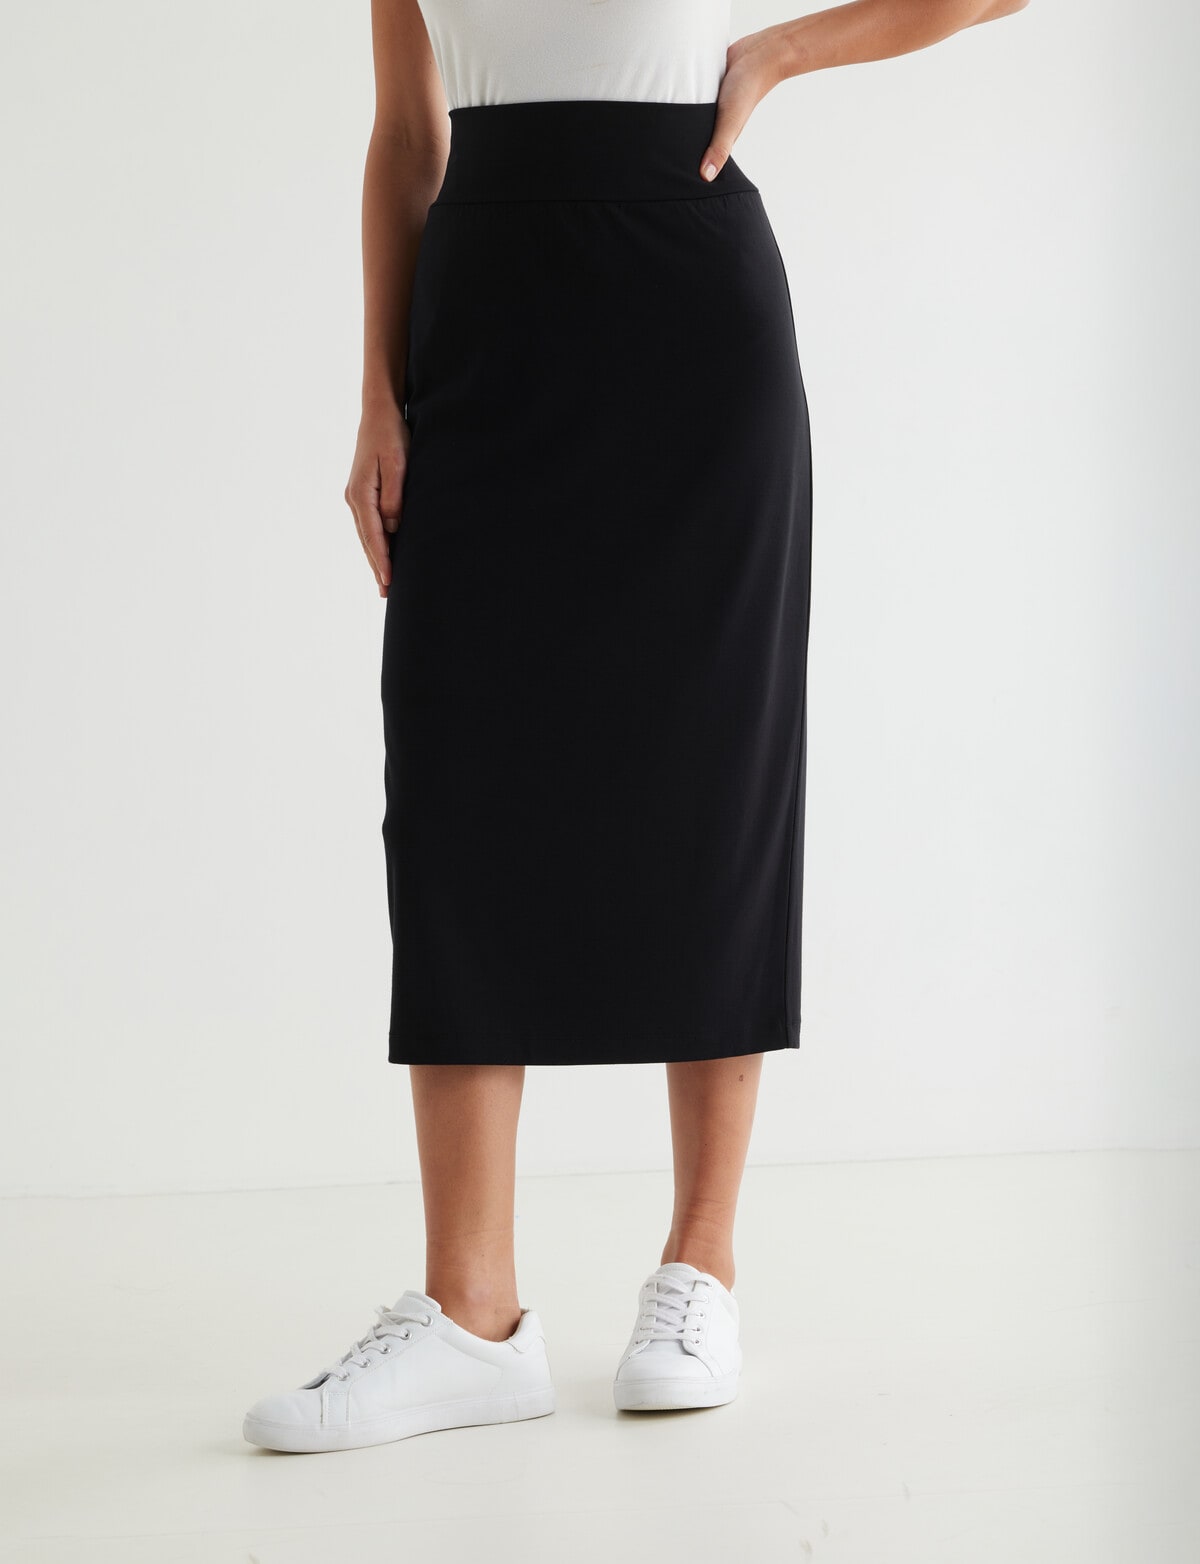 Buy Marc Olivier Women's Mini Skirt - a Bodycon Black Pencil Skirt That is  Short/Micro with an Elasticated Waist. Ladies Lycra Tube Skirt That is  Tight. Also in Cream, Red and Blue